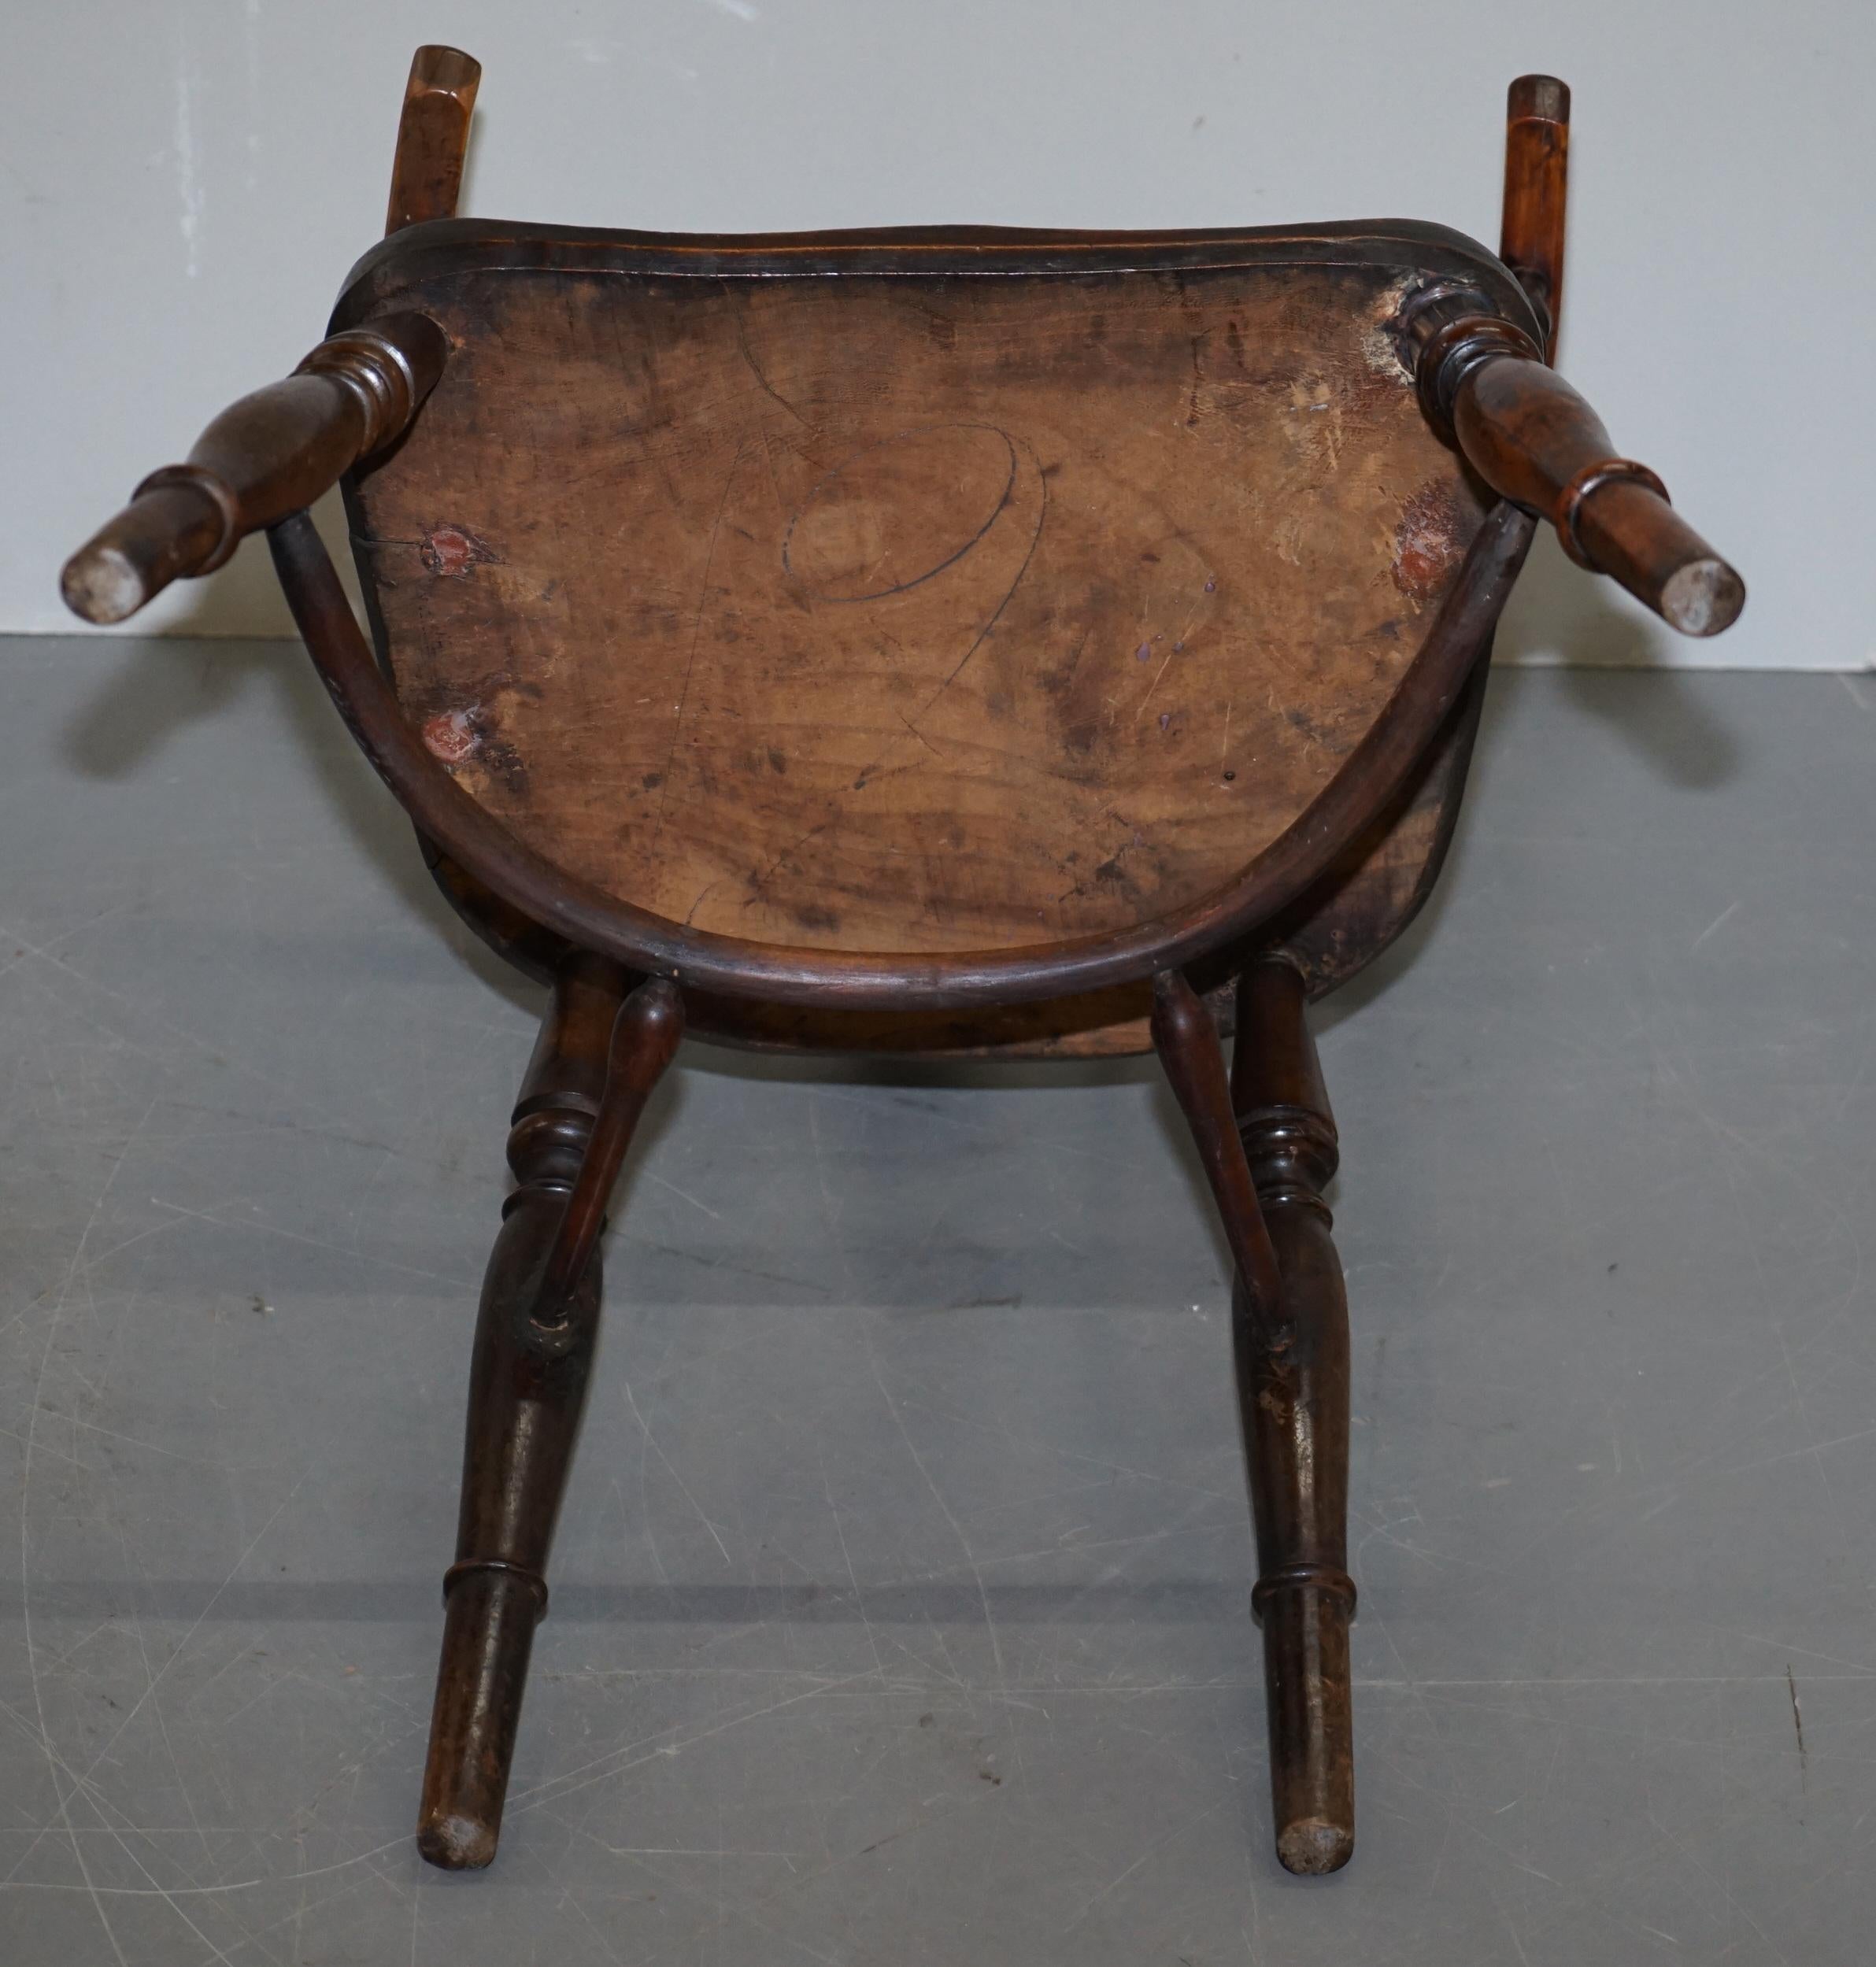 1 of 6 Solid Elm Windsor Armchairs circa 1860 English Countryhouse Furniture For Sale 12